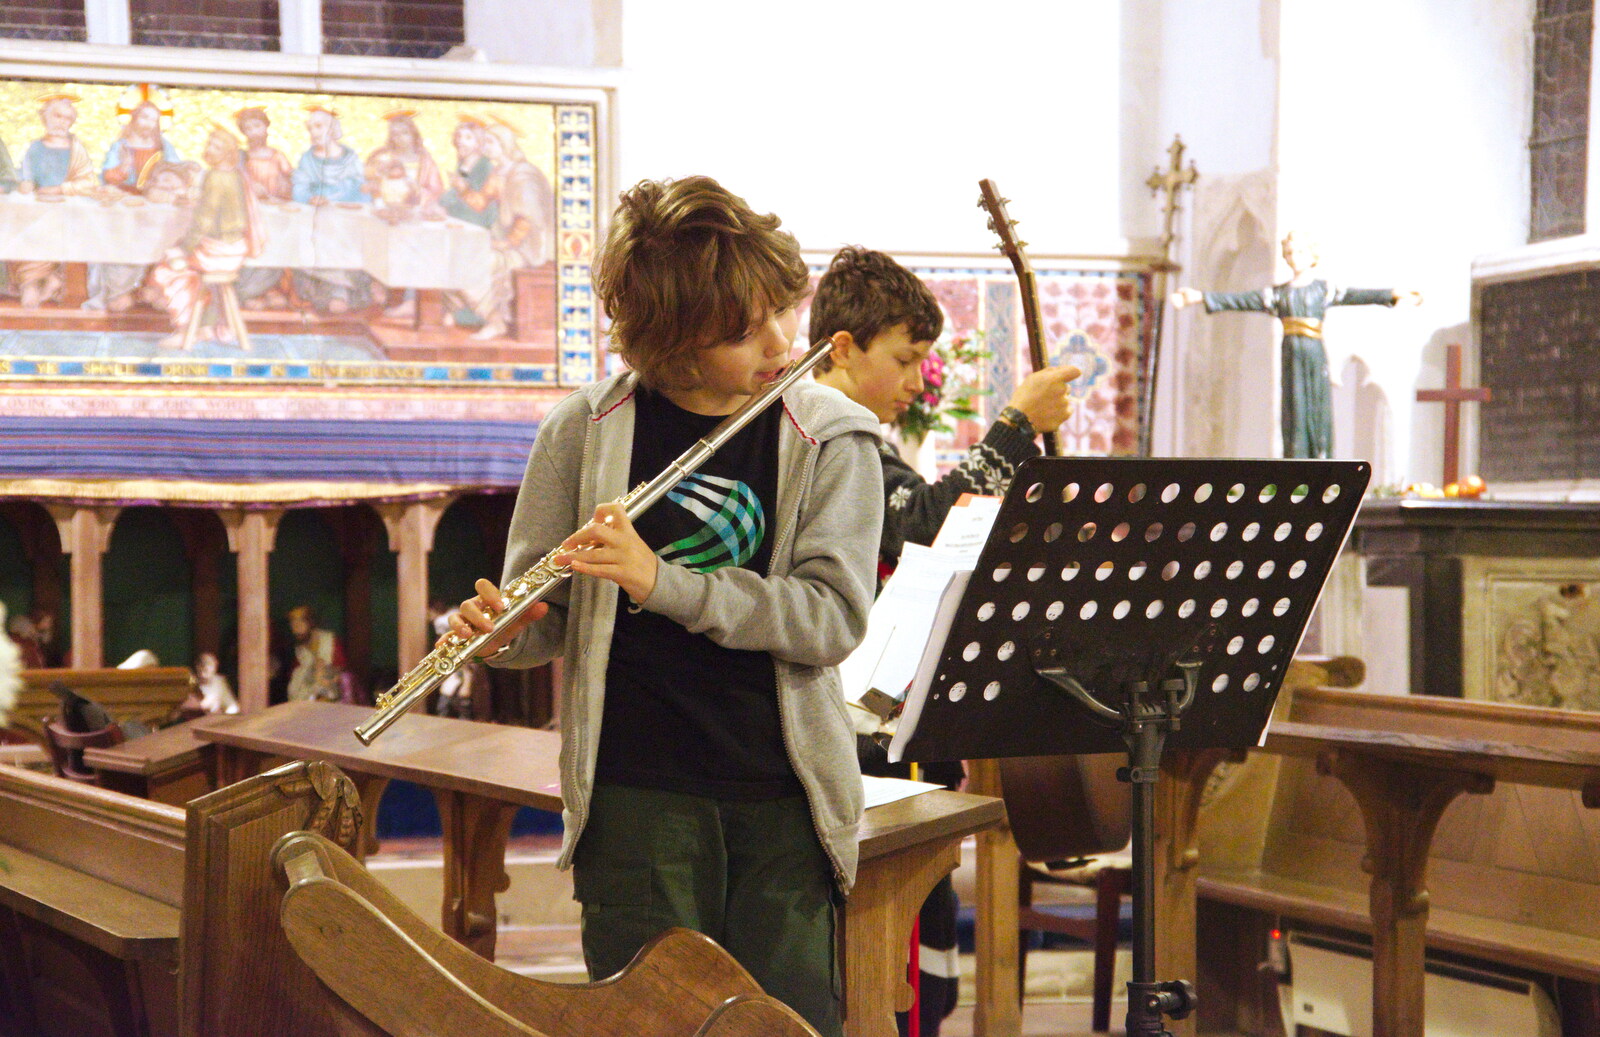 Fred blows on his flute from A Christingle Service, St. Nicholas Church, Oakley, Suffolk - 24th December 2019